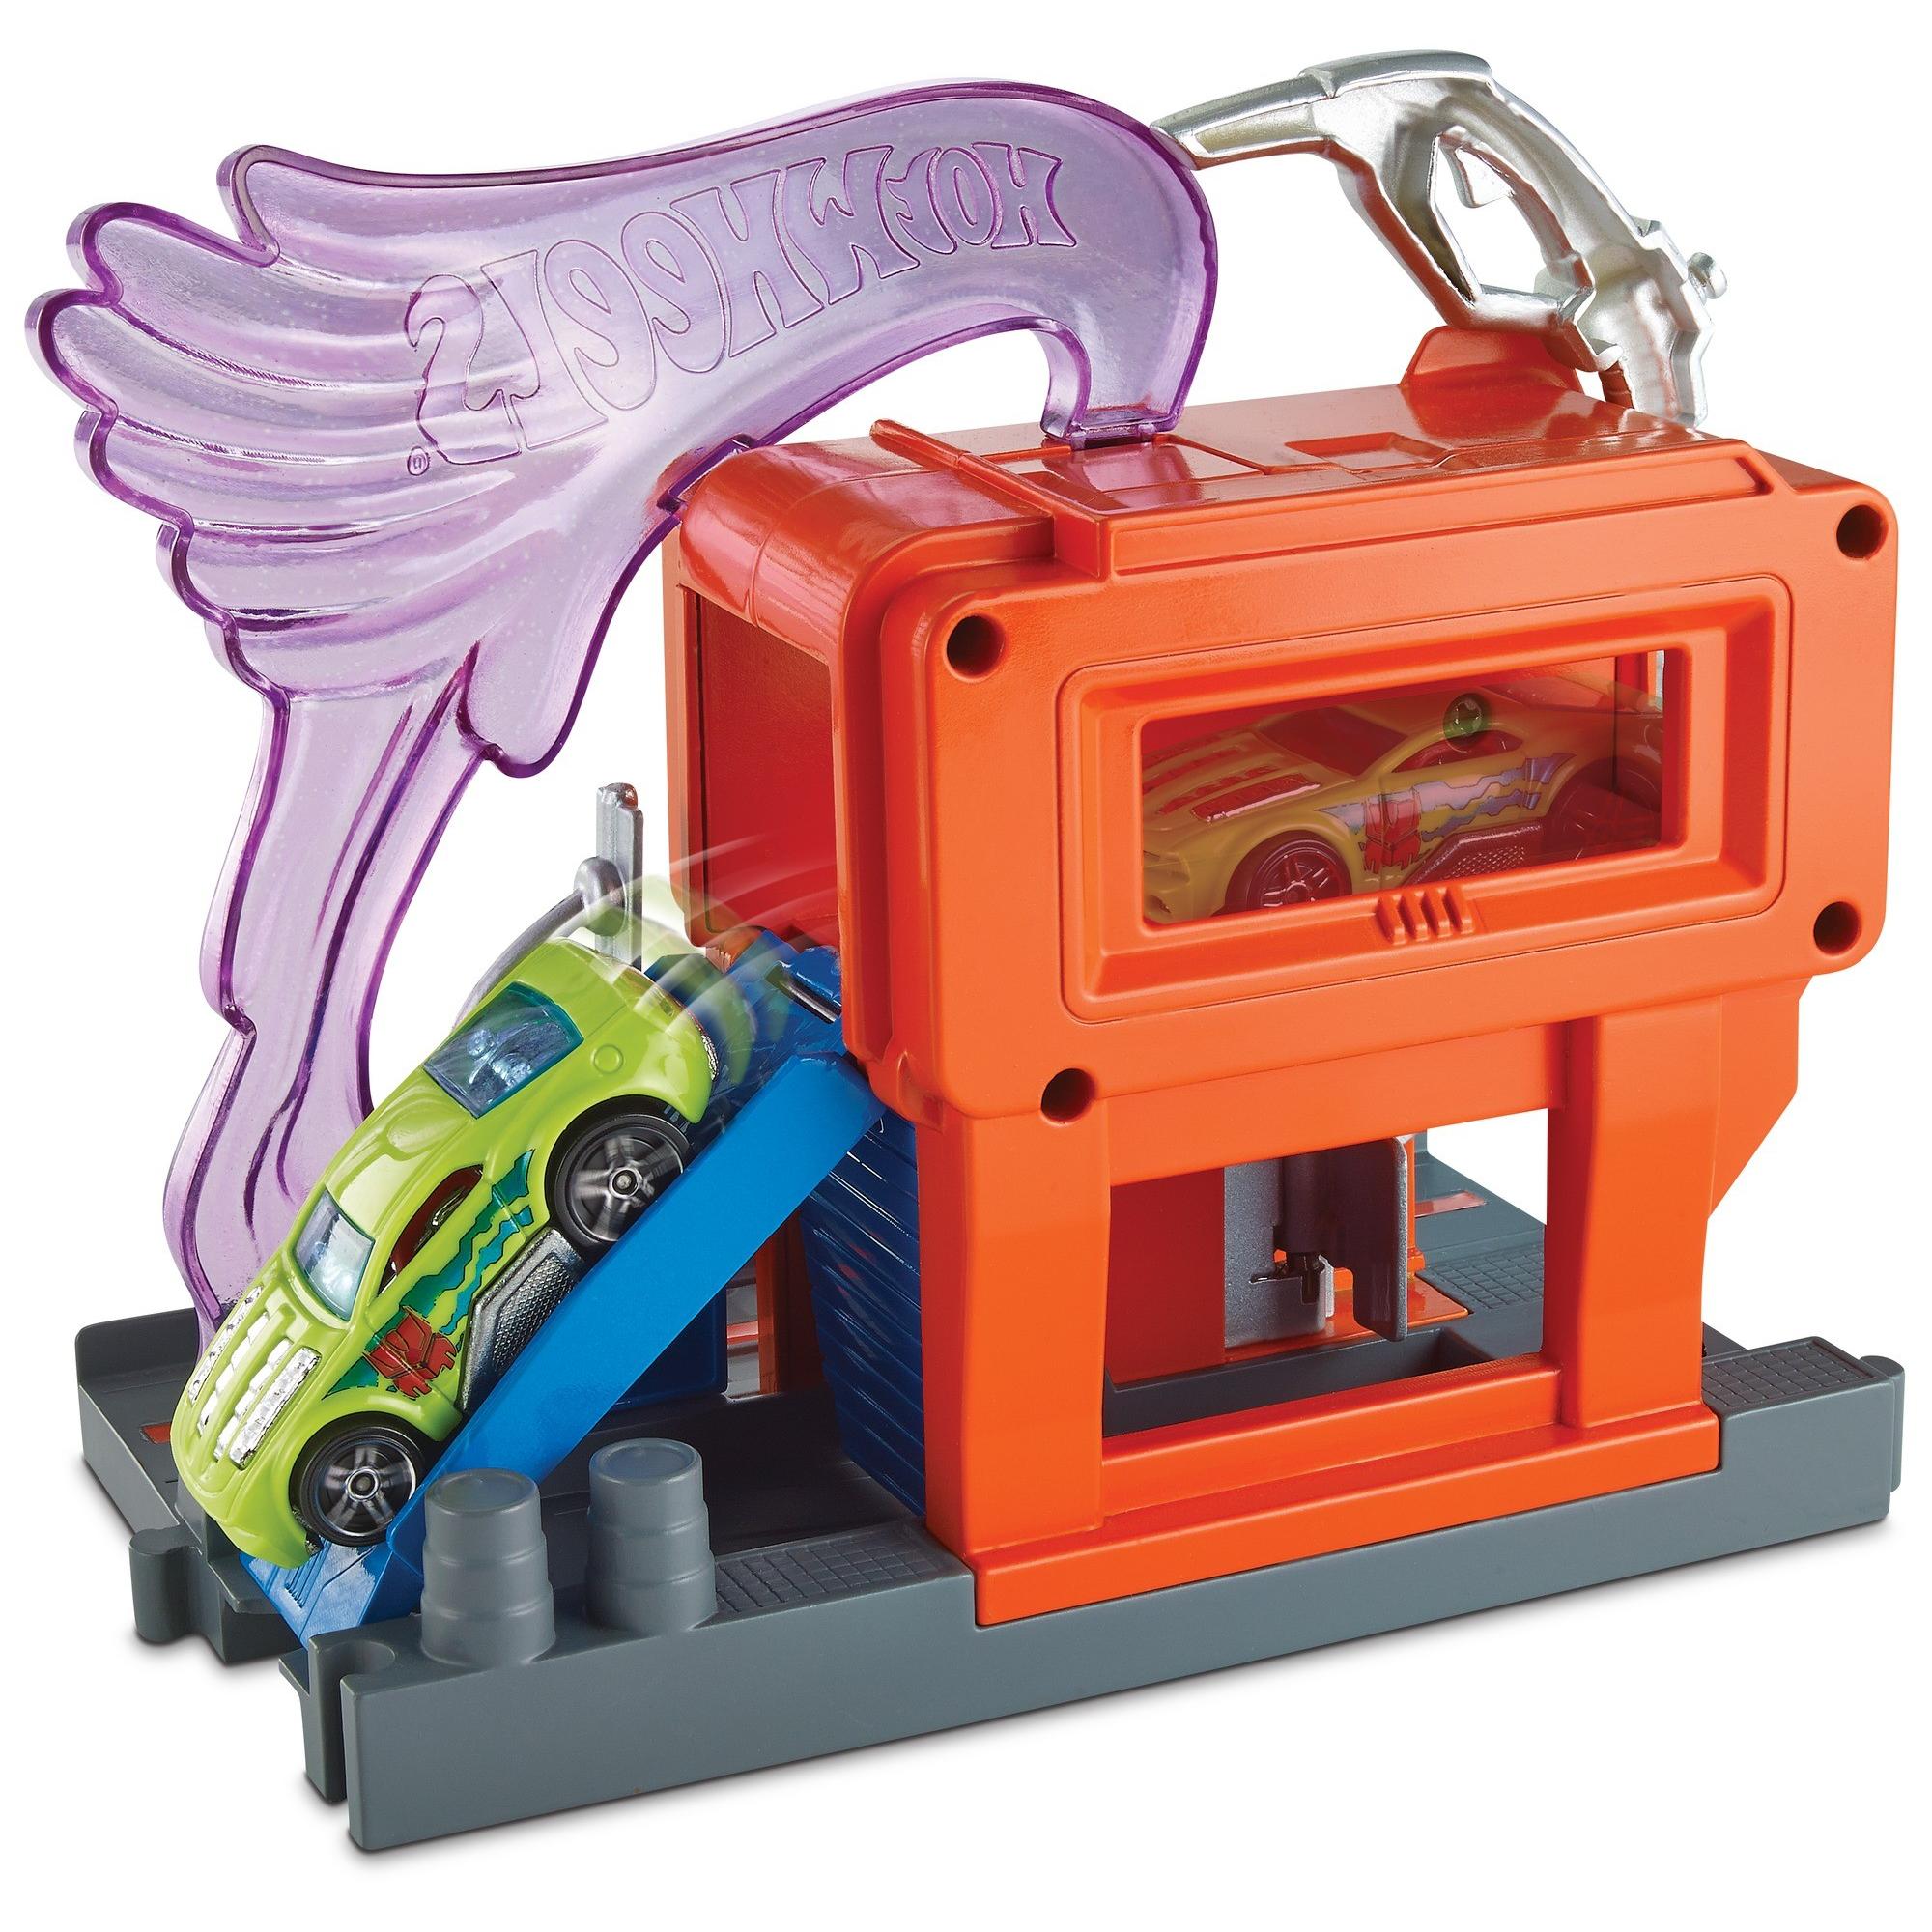 Hot Wheels City Downtown Super Fuel Stop Play Set - image 5 of 5